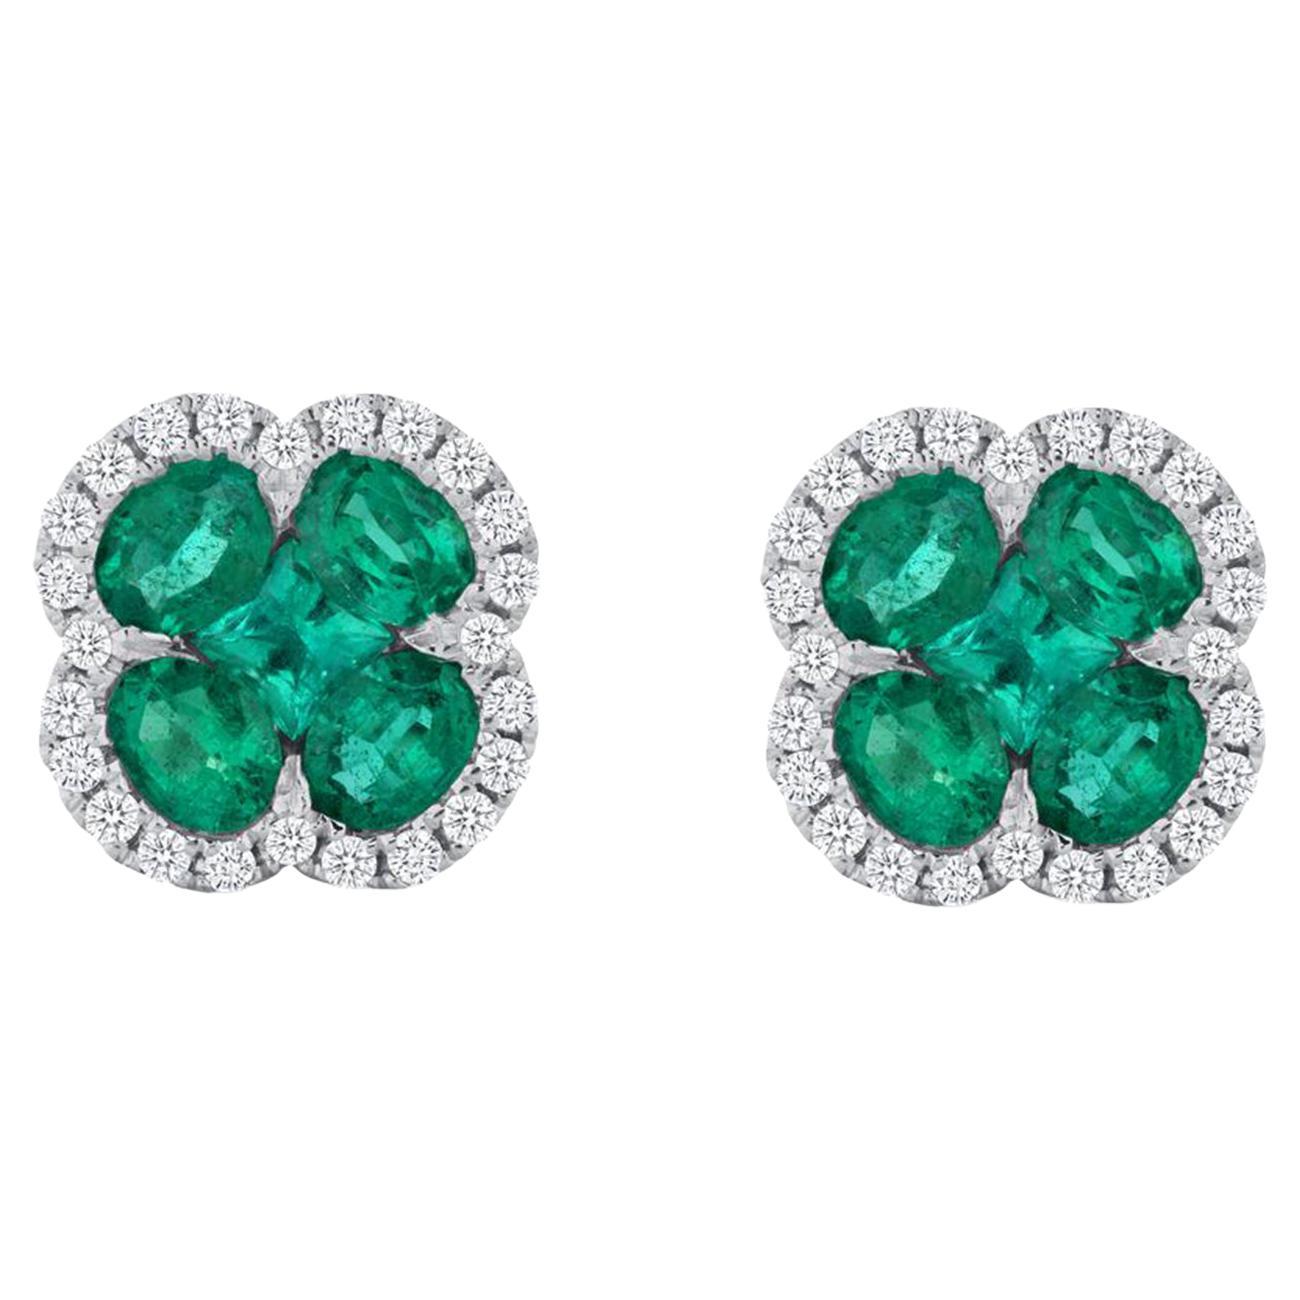 1.32 CT Natural Emerald 0.35 CT Diamonds 18K Gold Stud Four Leaf Clover Earrings For Sale